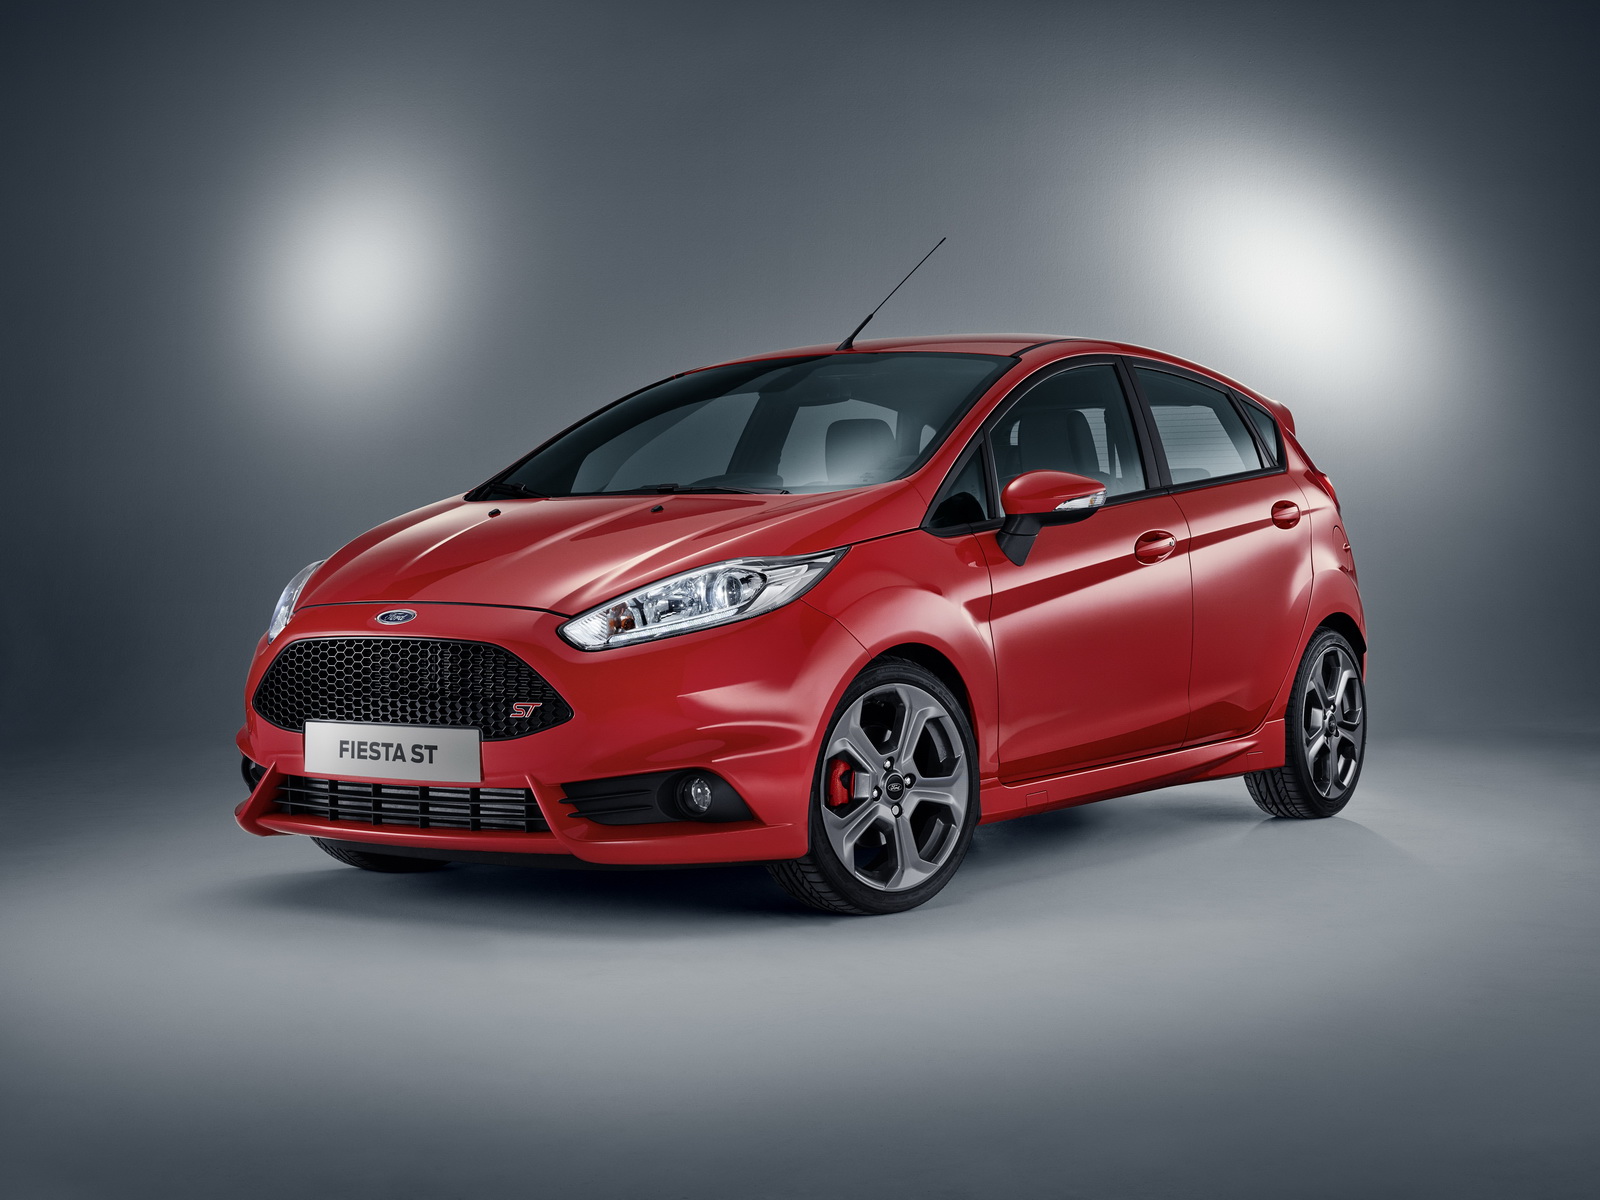 Ford Fiesta St 5 Door Now Available In Europe